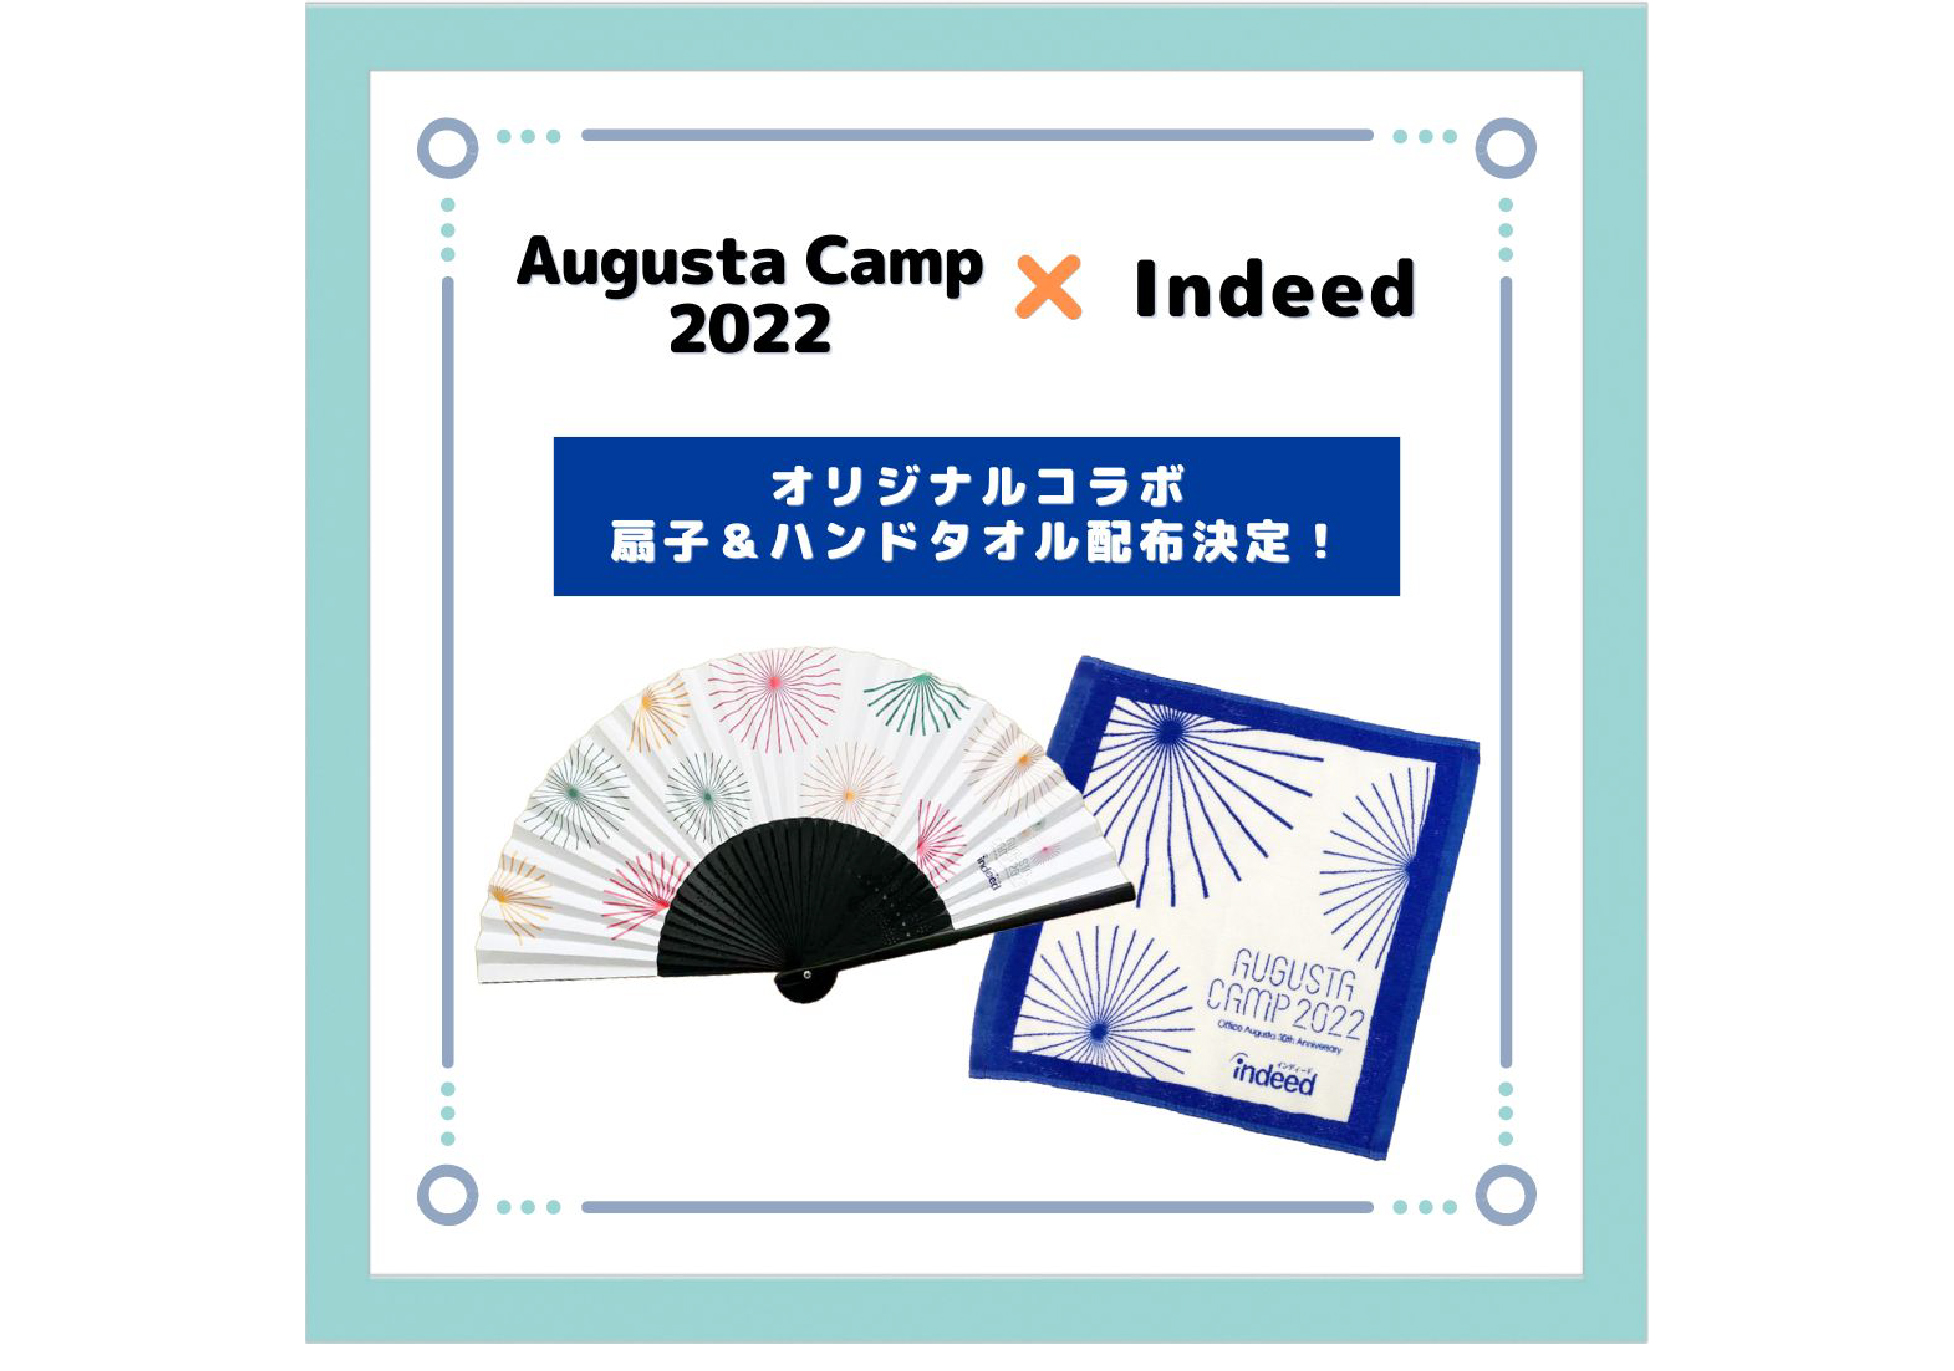 Job search engine “Indeed” collaboration follow-up! Augusta Camp original collaboration goods will be distributed on the day!